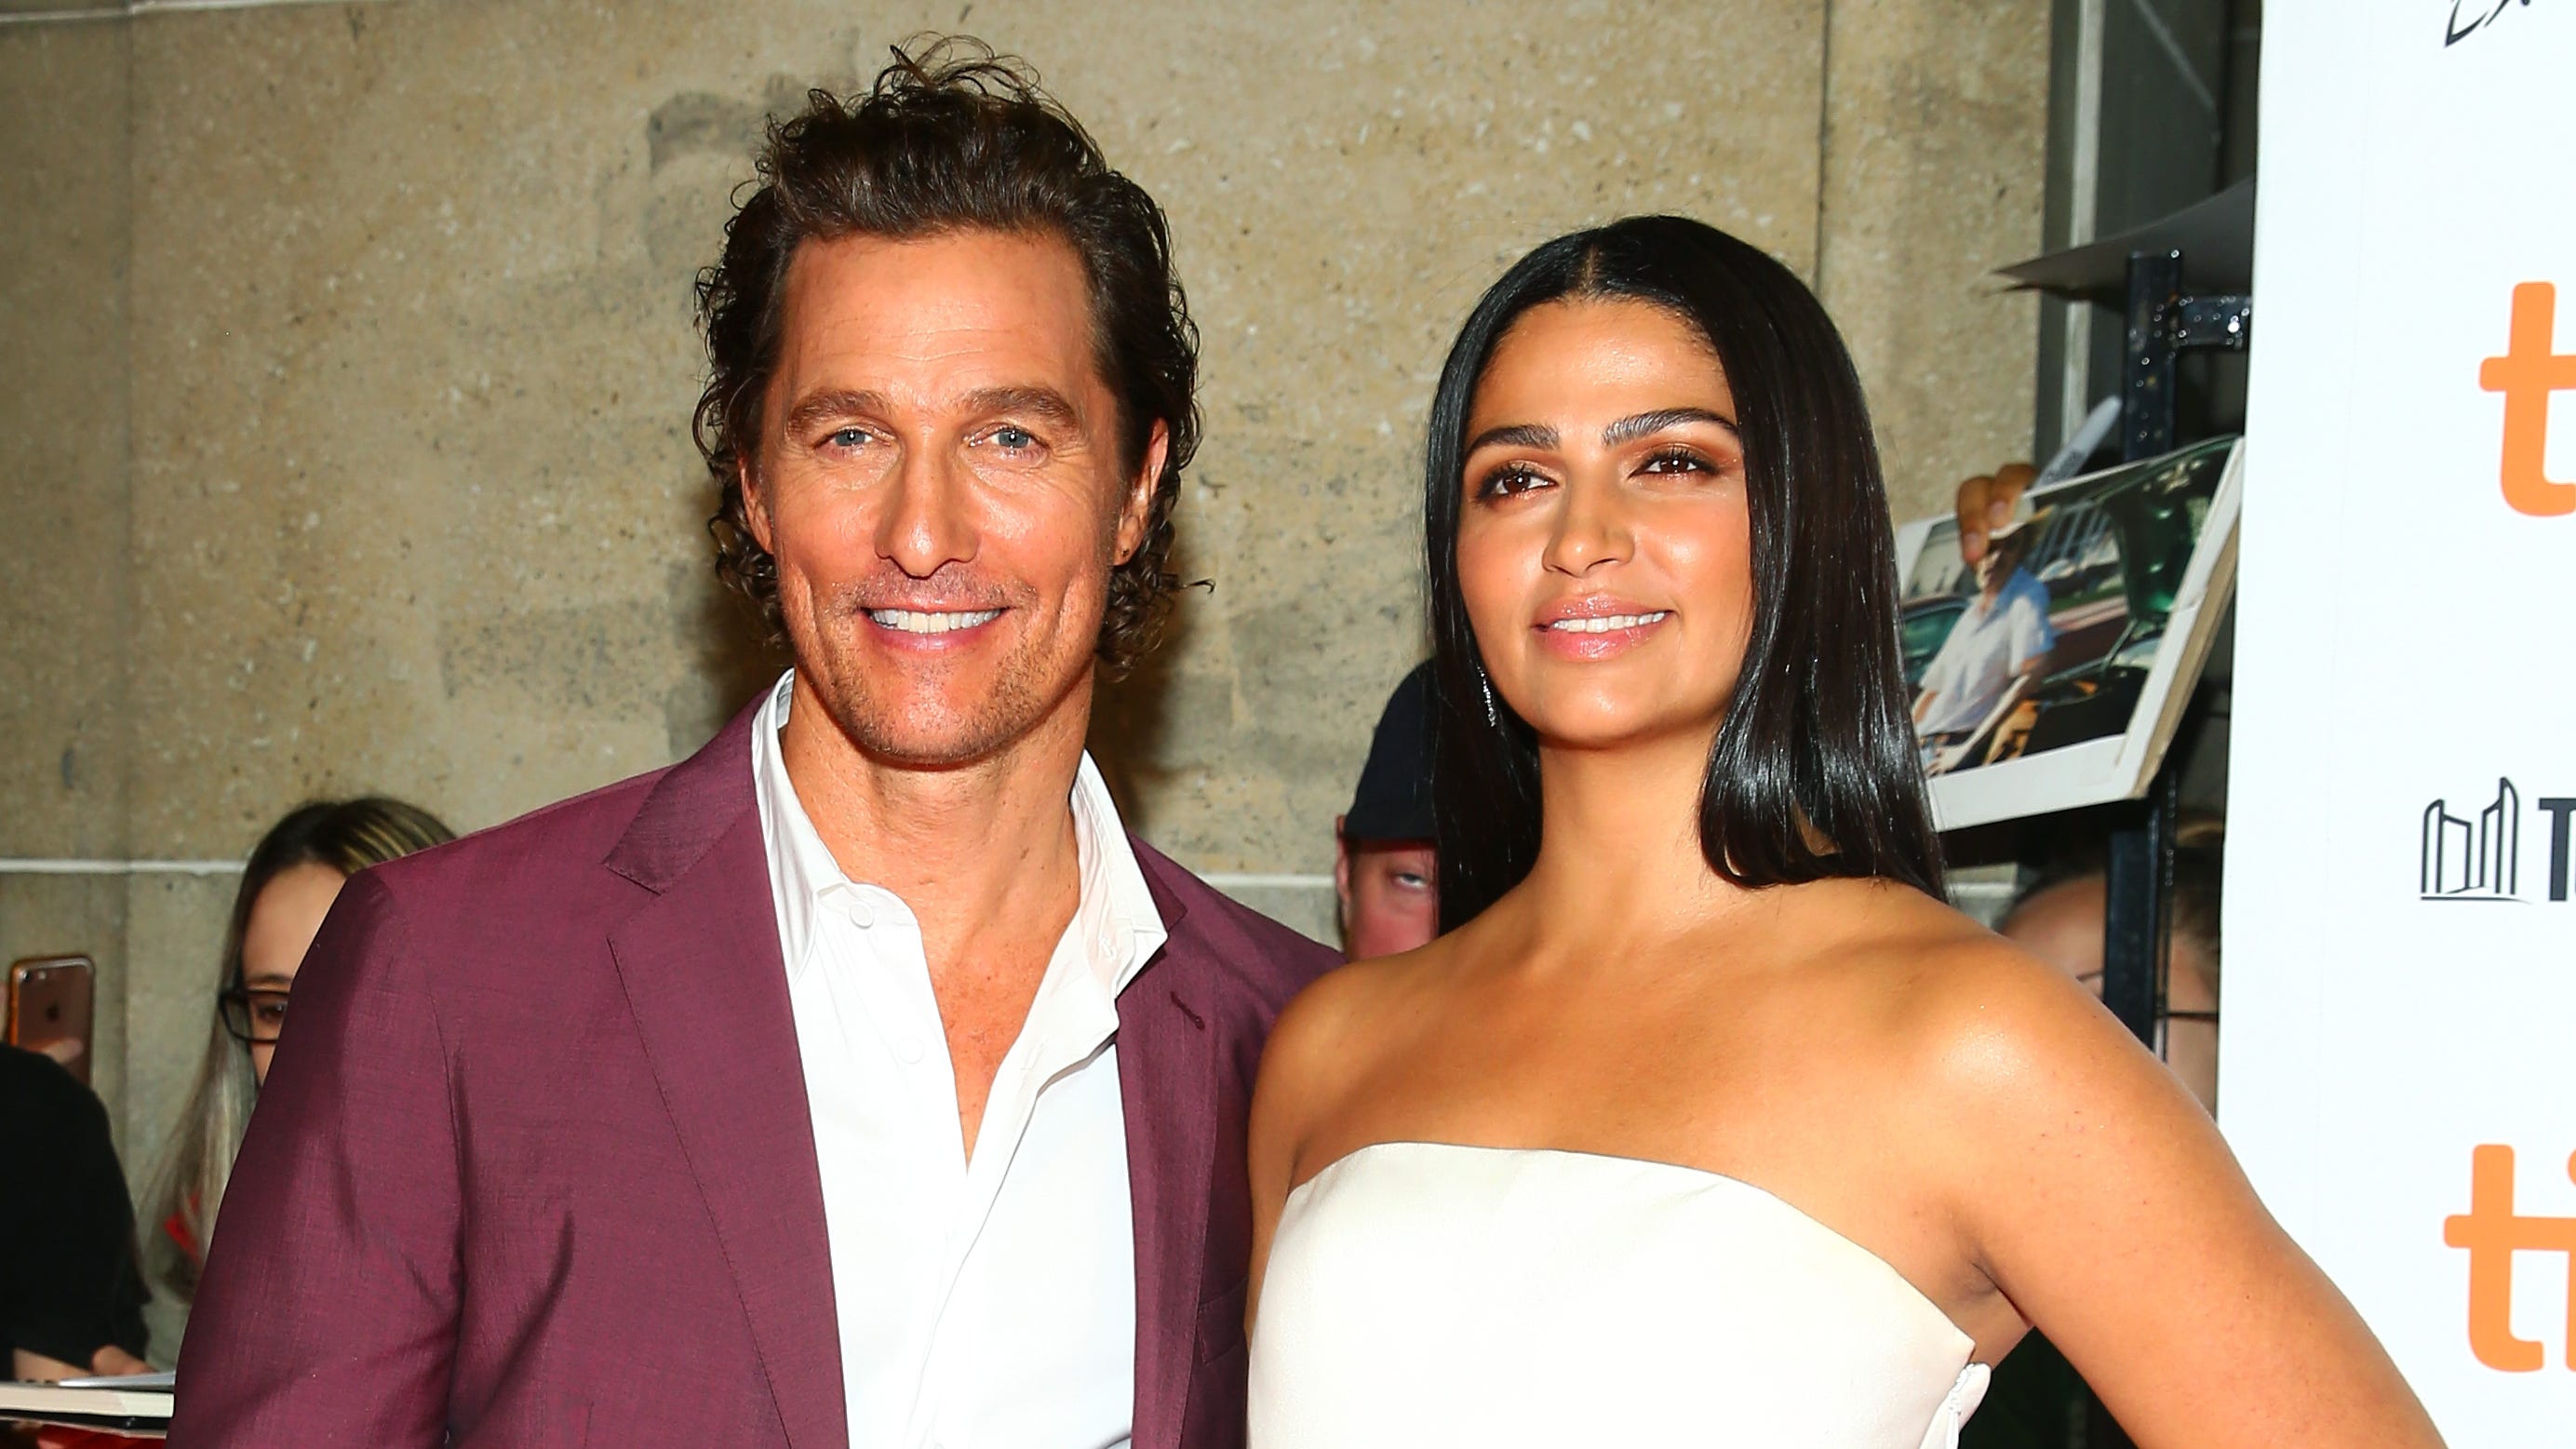 Matthew McConaughey is stricter dad than he plays in 'White Boy Rick'